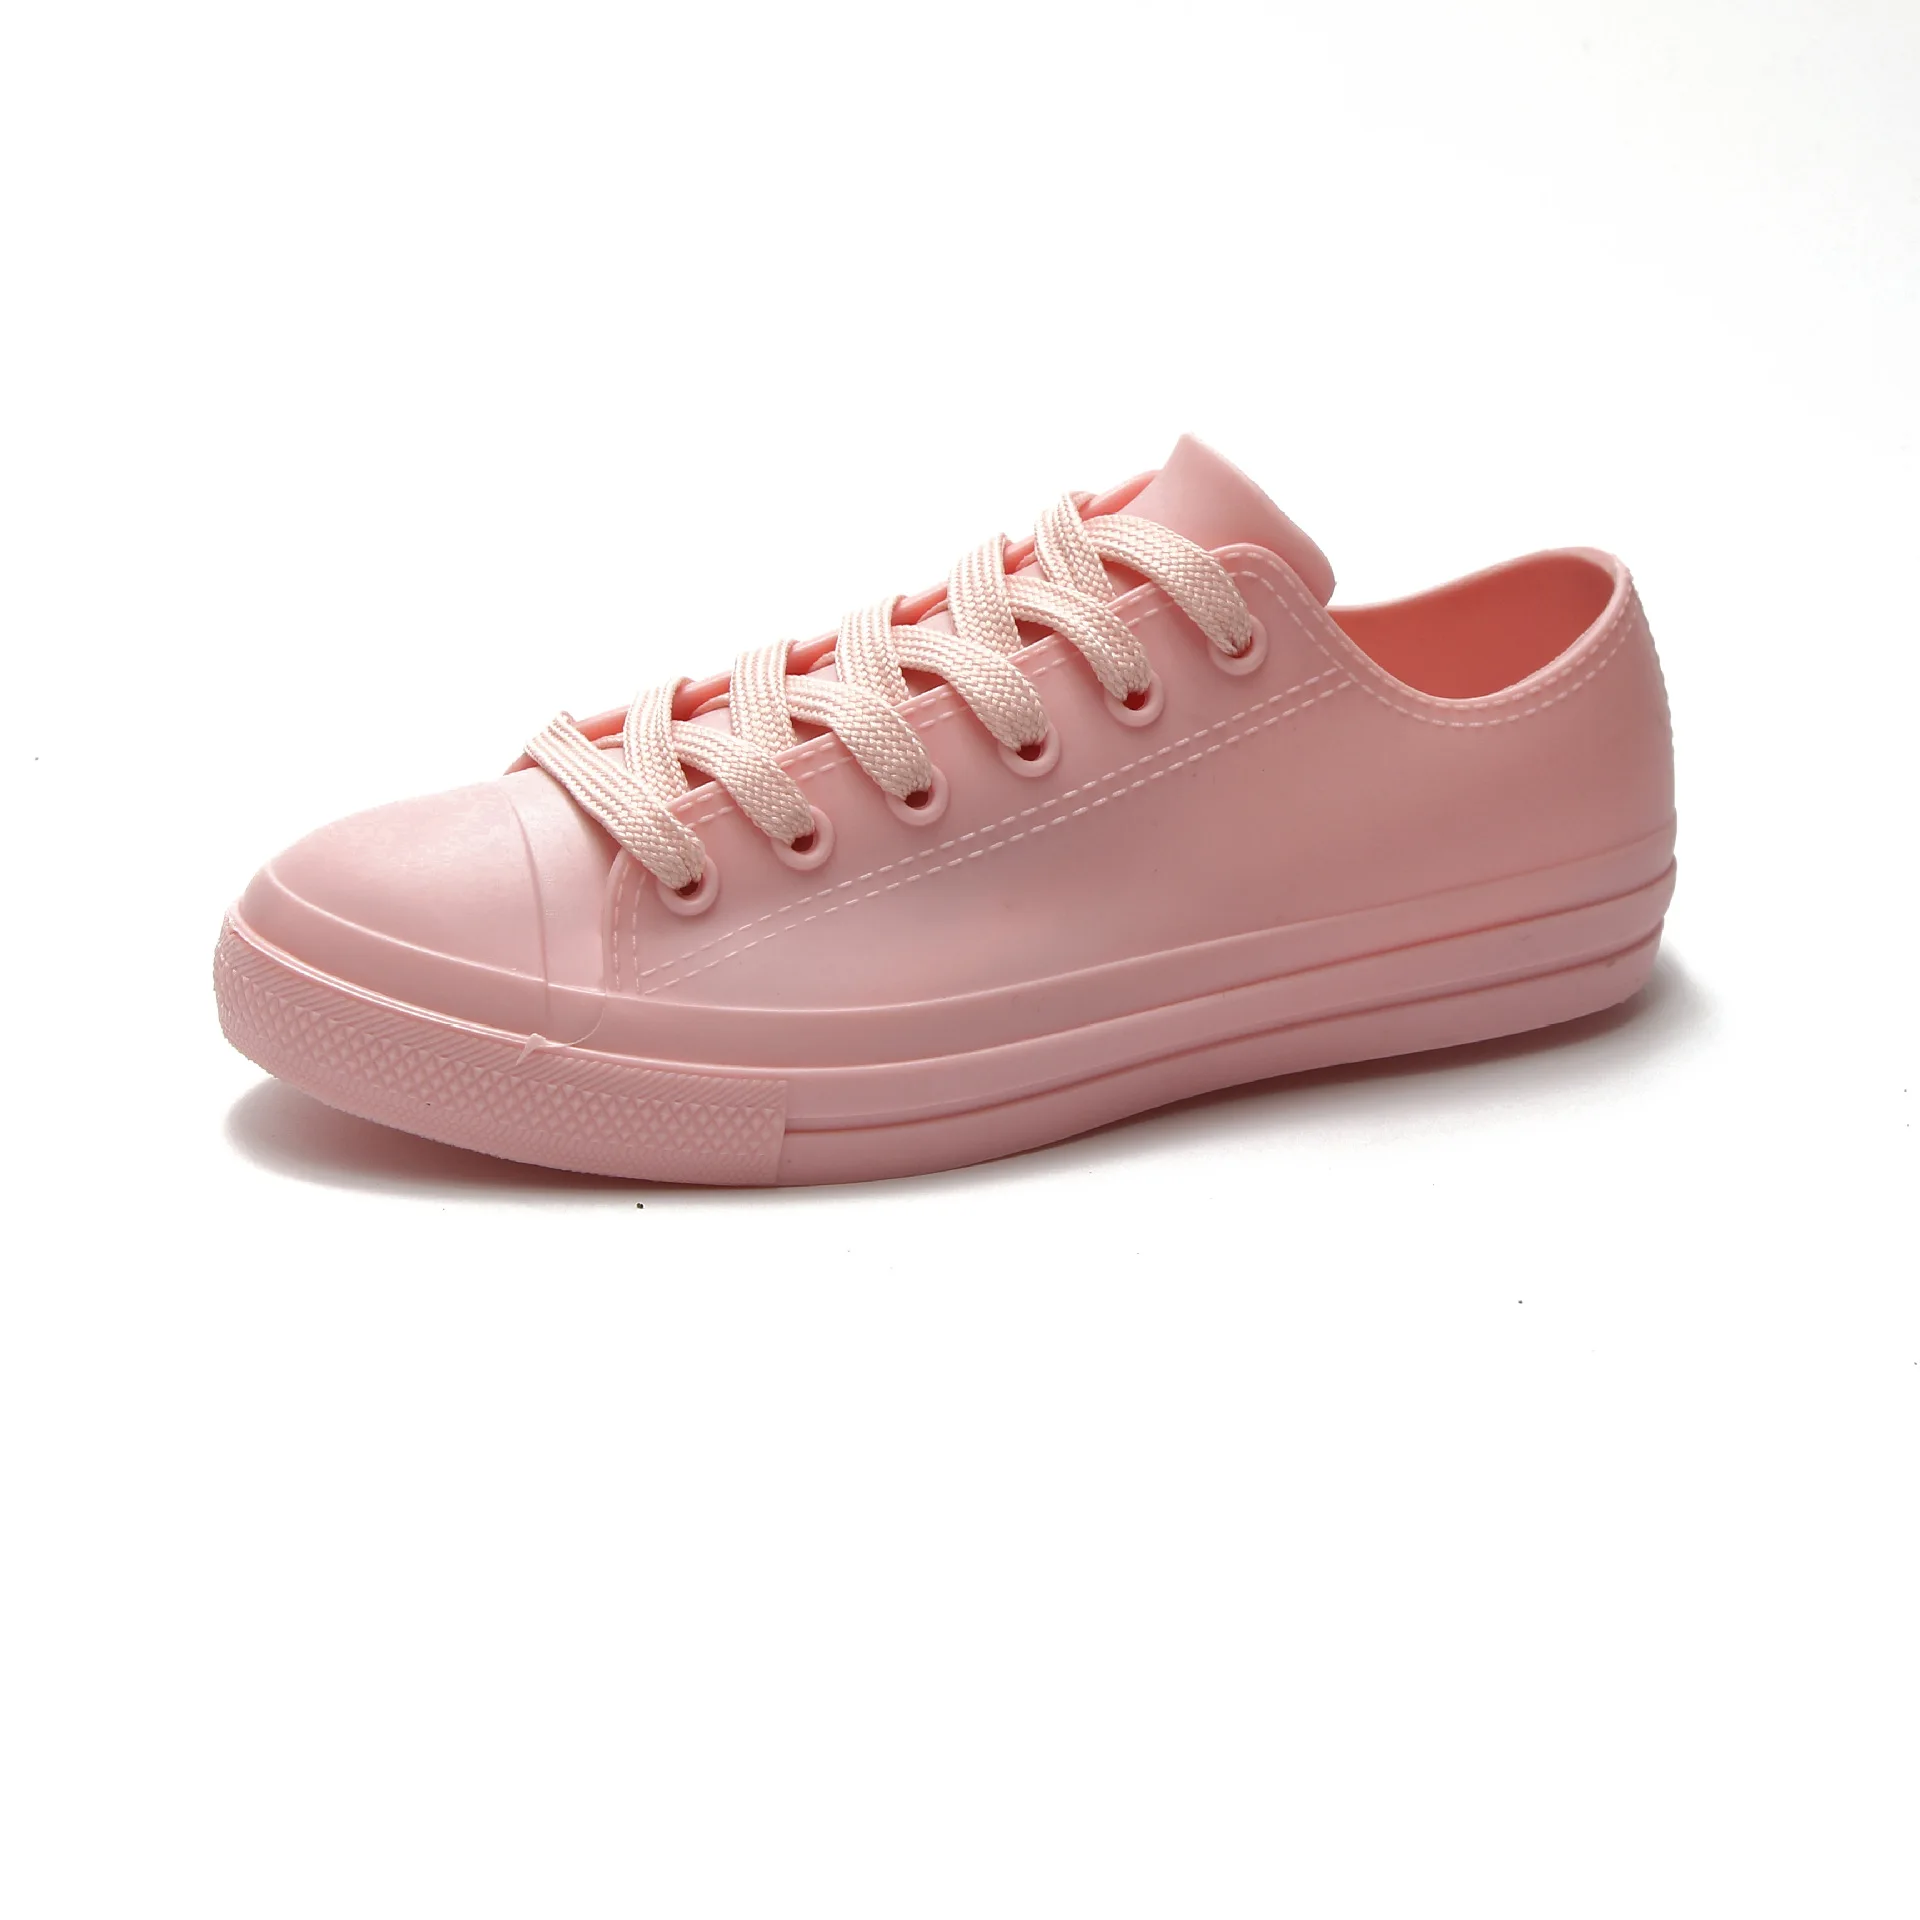 rubber shoes for girls white